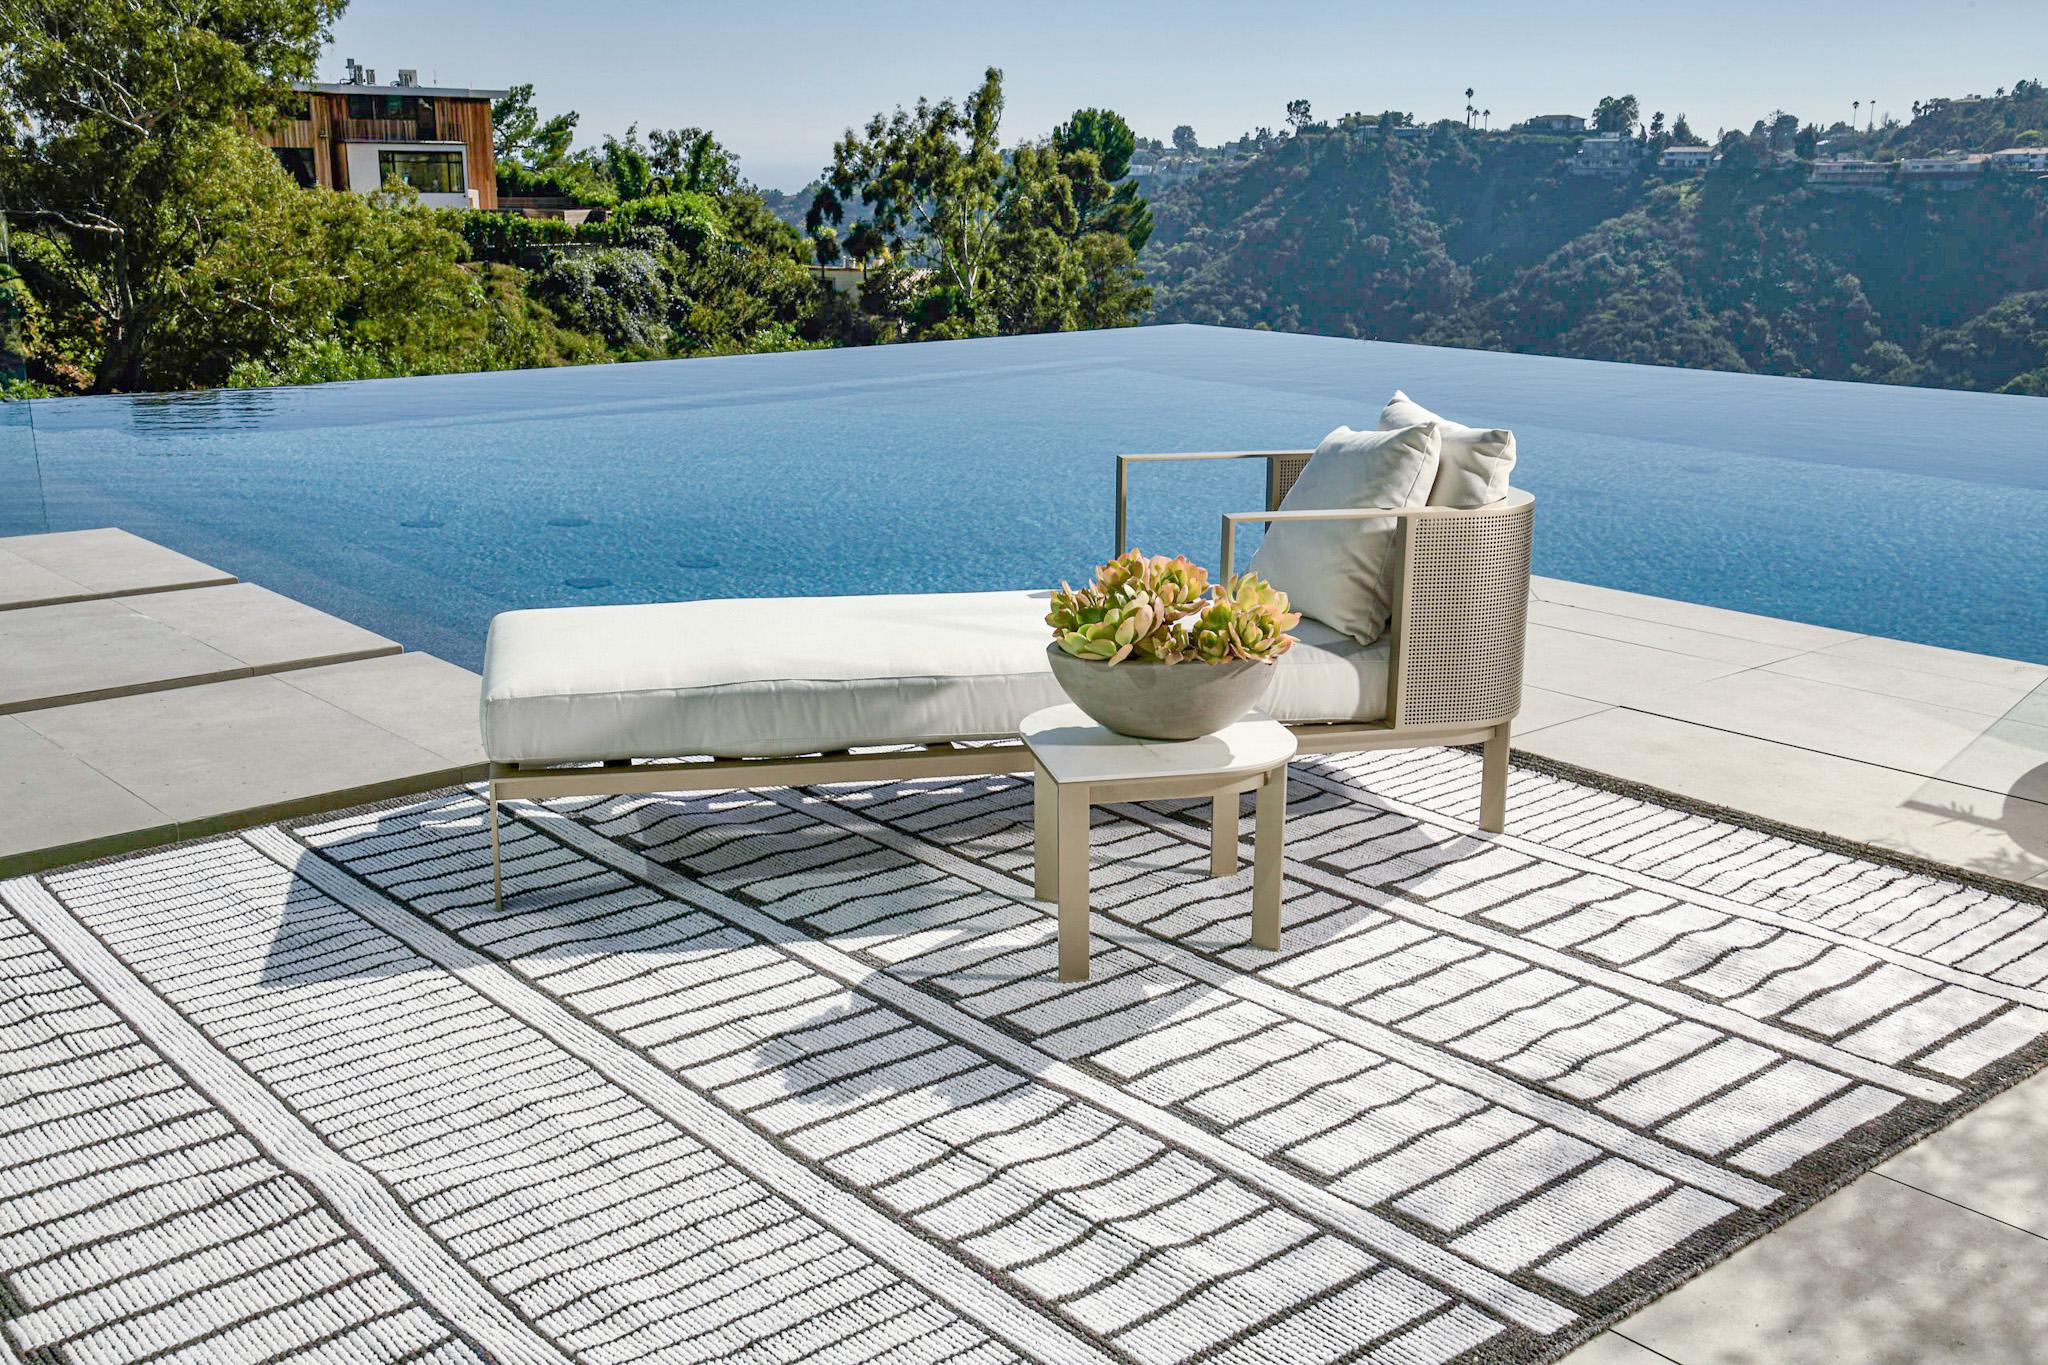 Enjoy the fresh air with Nasim, rugs that work indoors and out.

Rug Number
31438
Size
9' 1